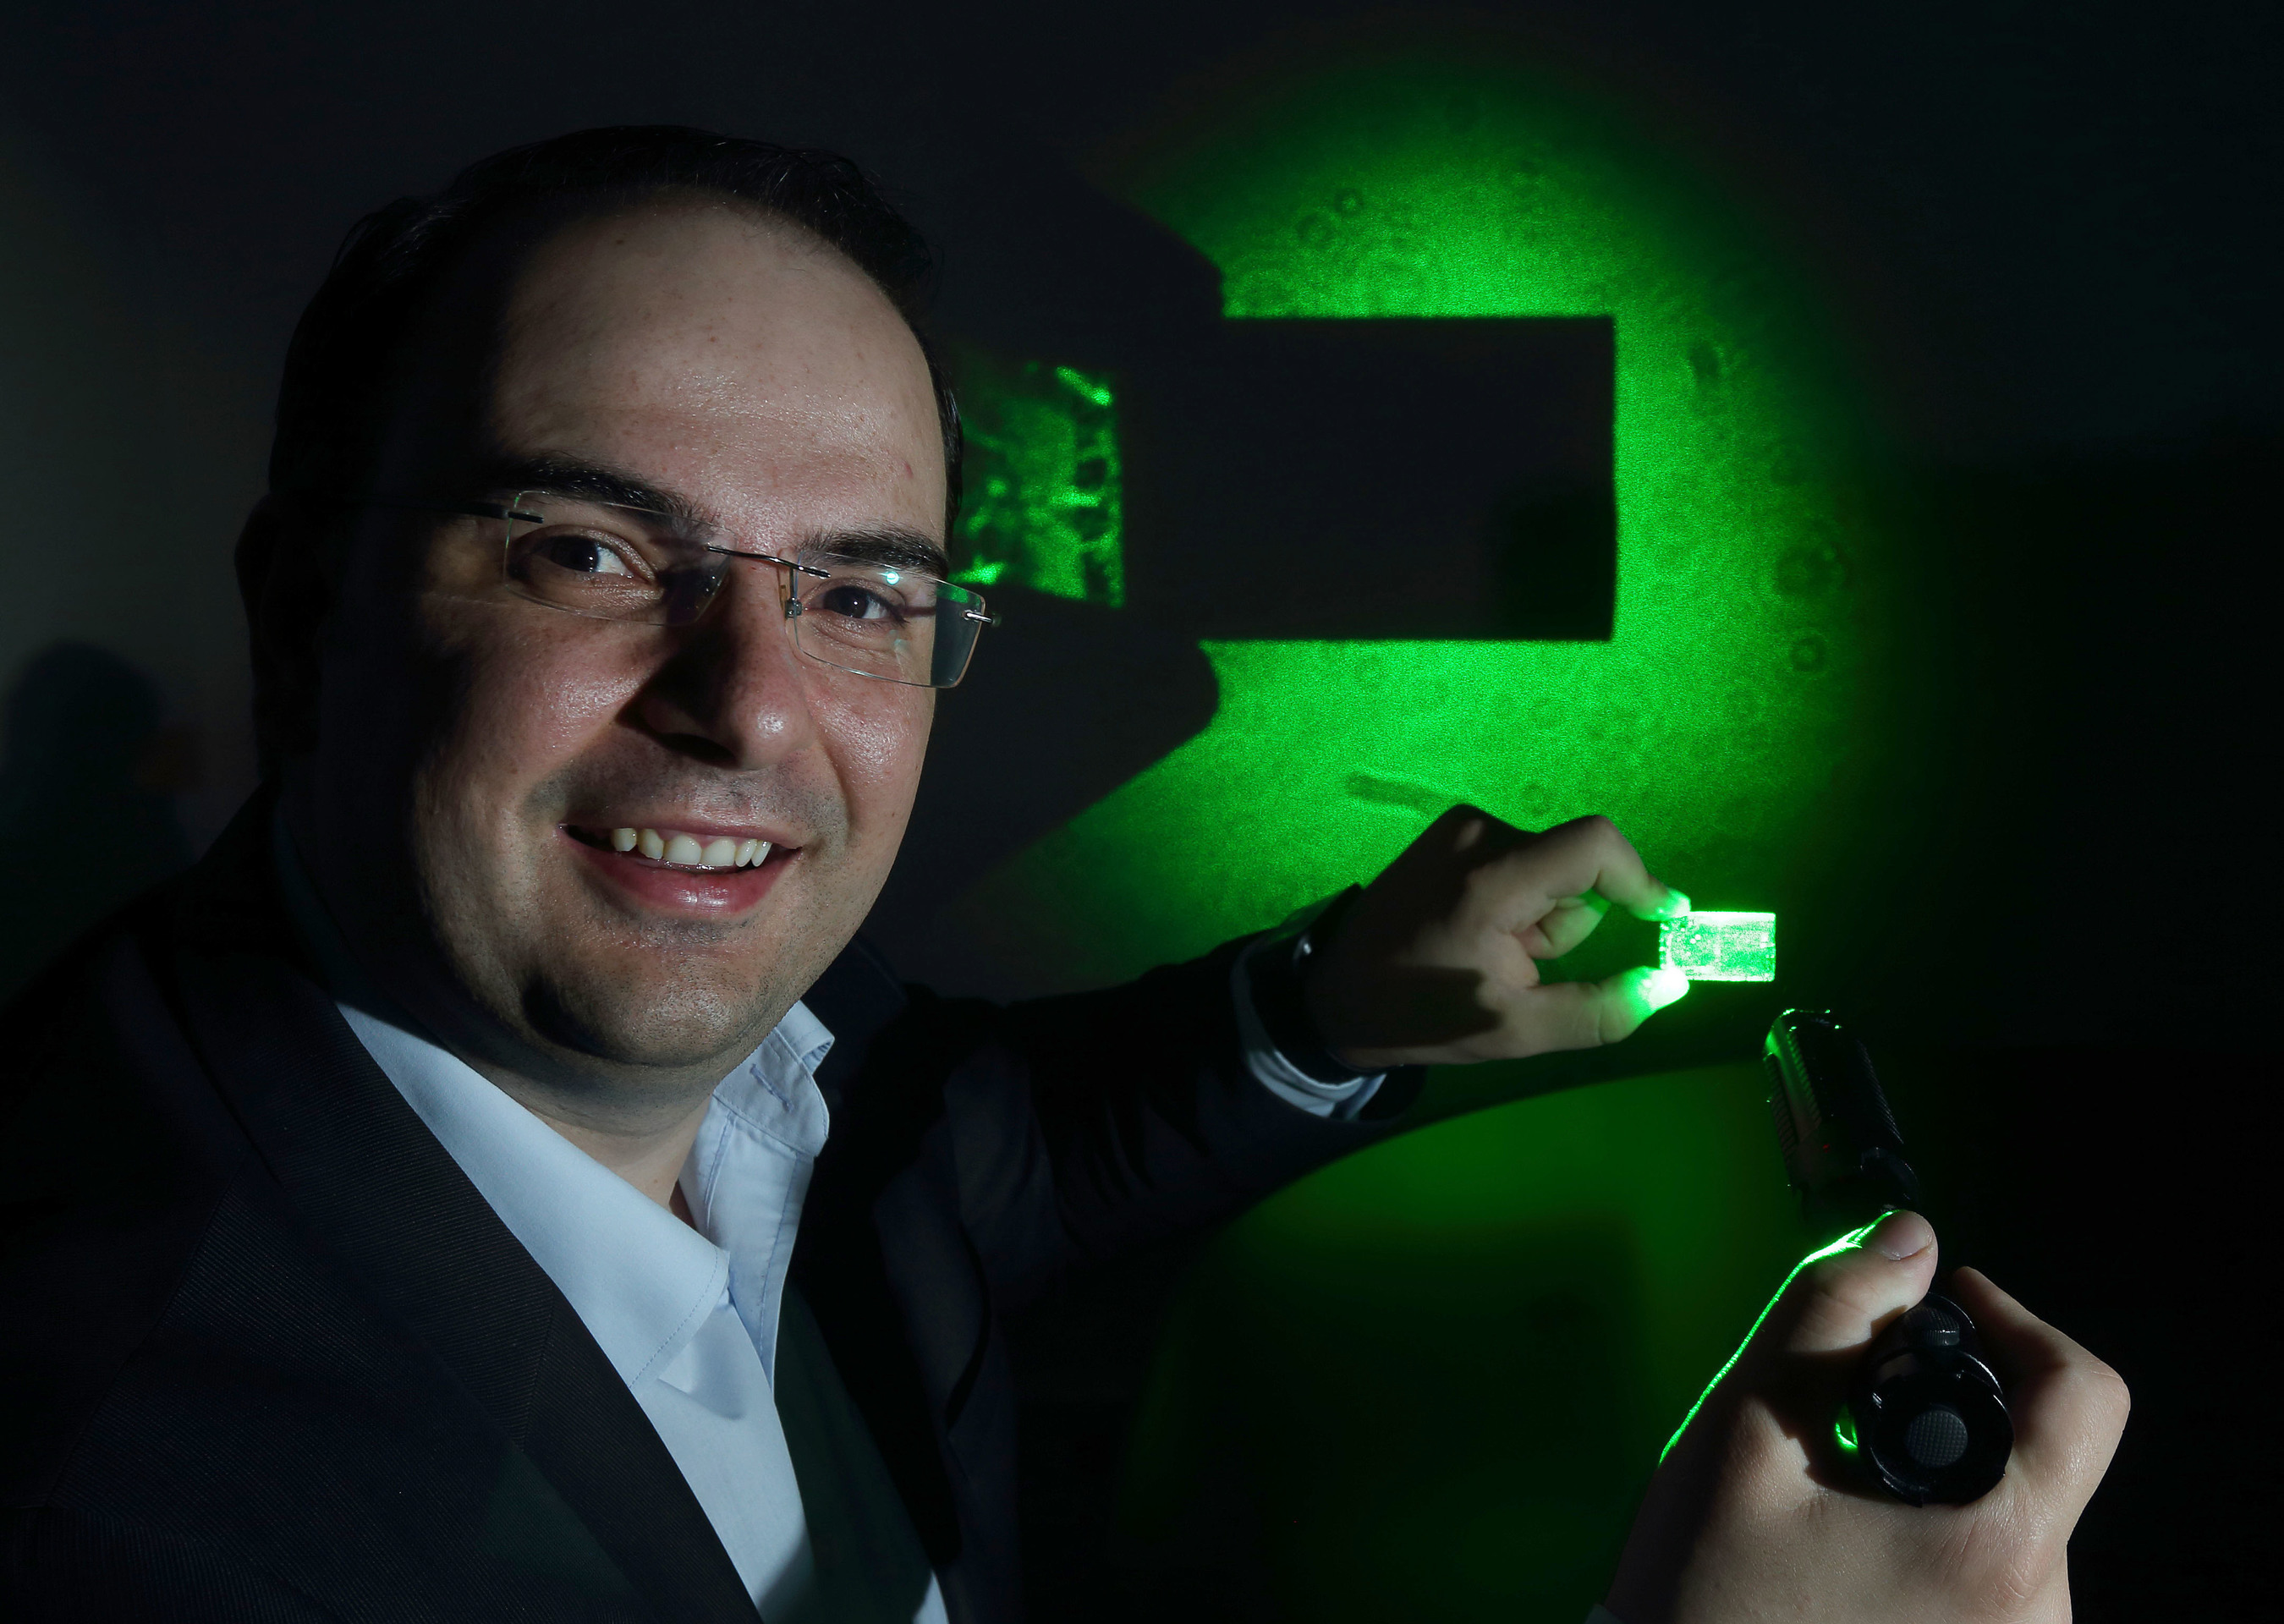 George Palikaras, President and CEO Lamda Guard demonstrates the effectiveness of his uniquely transparent yet 100% deflective nanocomposite windshield film at the announcement of the company's partnership with leading aircraft manufacturer Airbus. The film has the capacity to disable cockpit laser strikes. (PRNewsFoto/Lamda Guard)